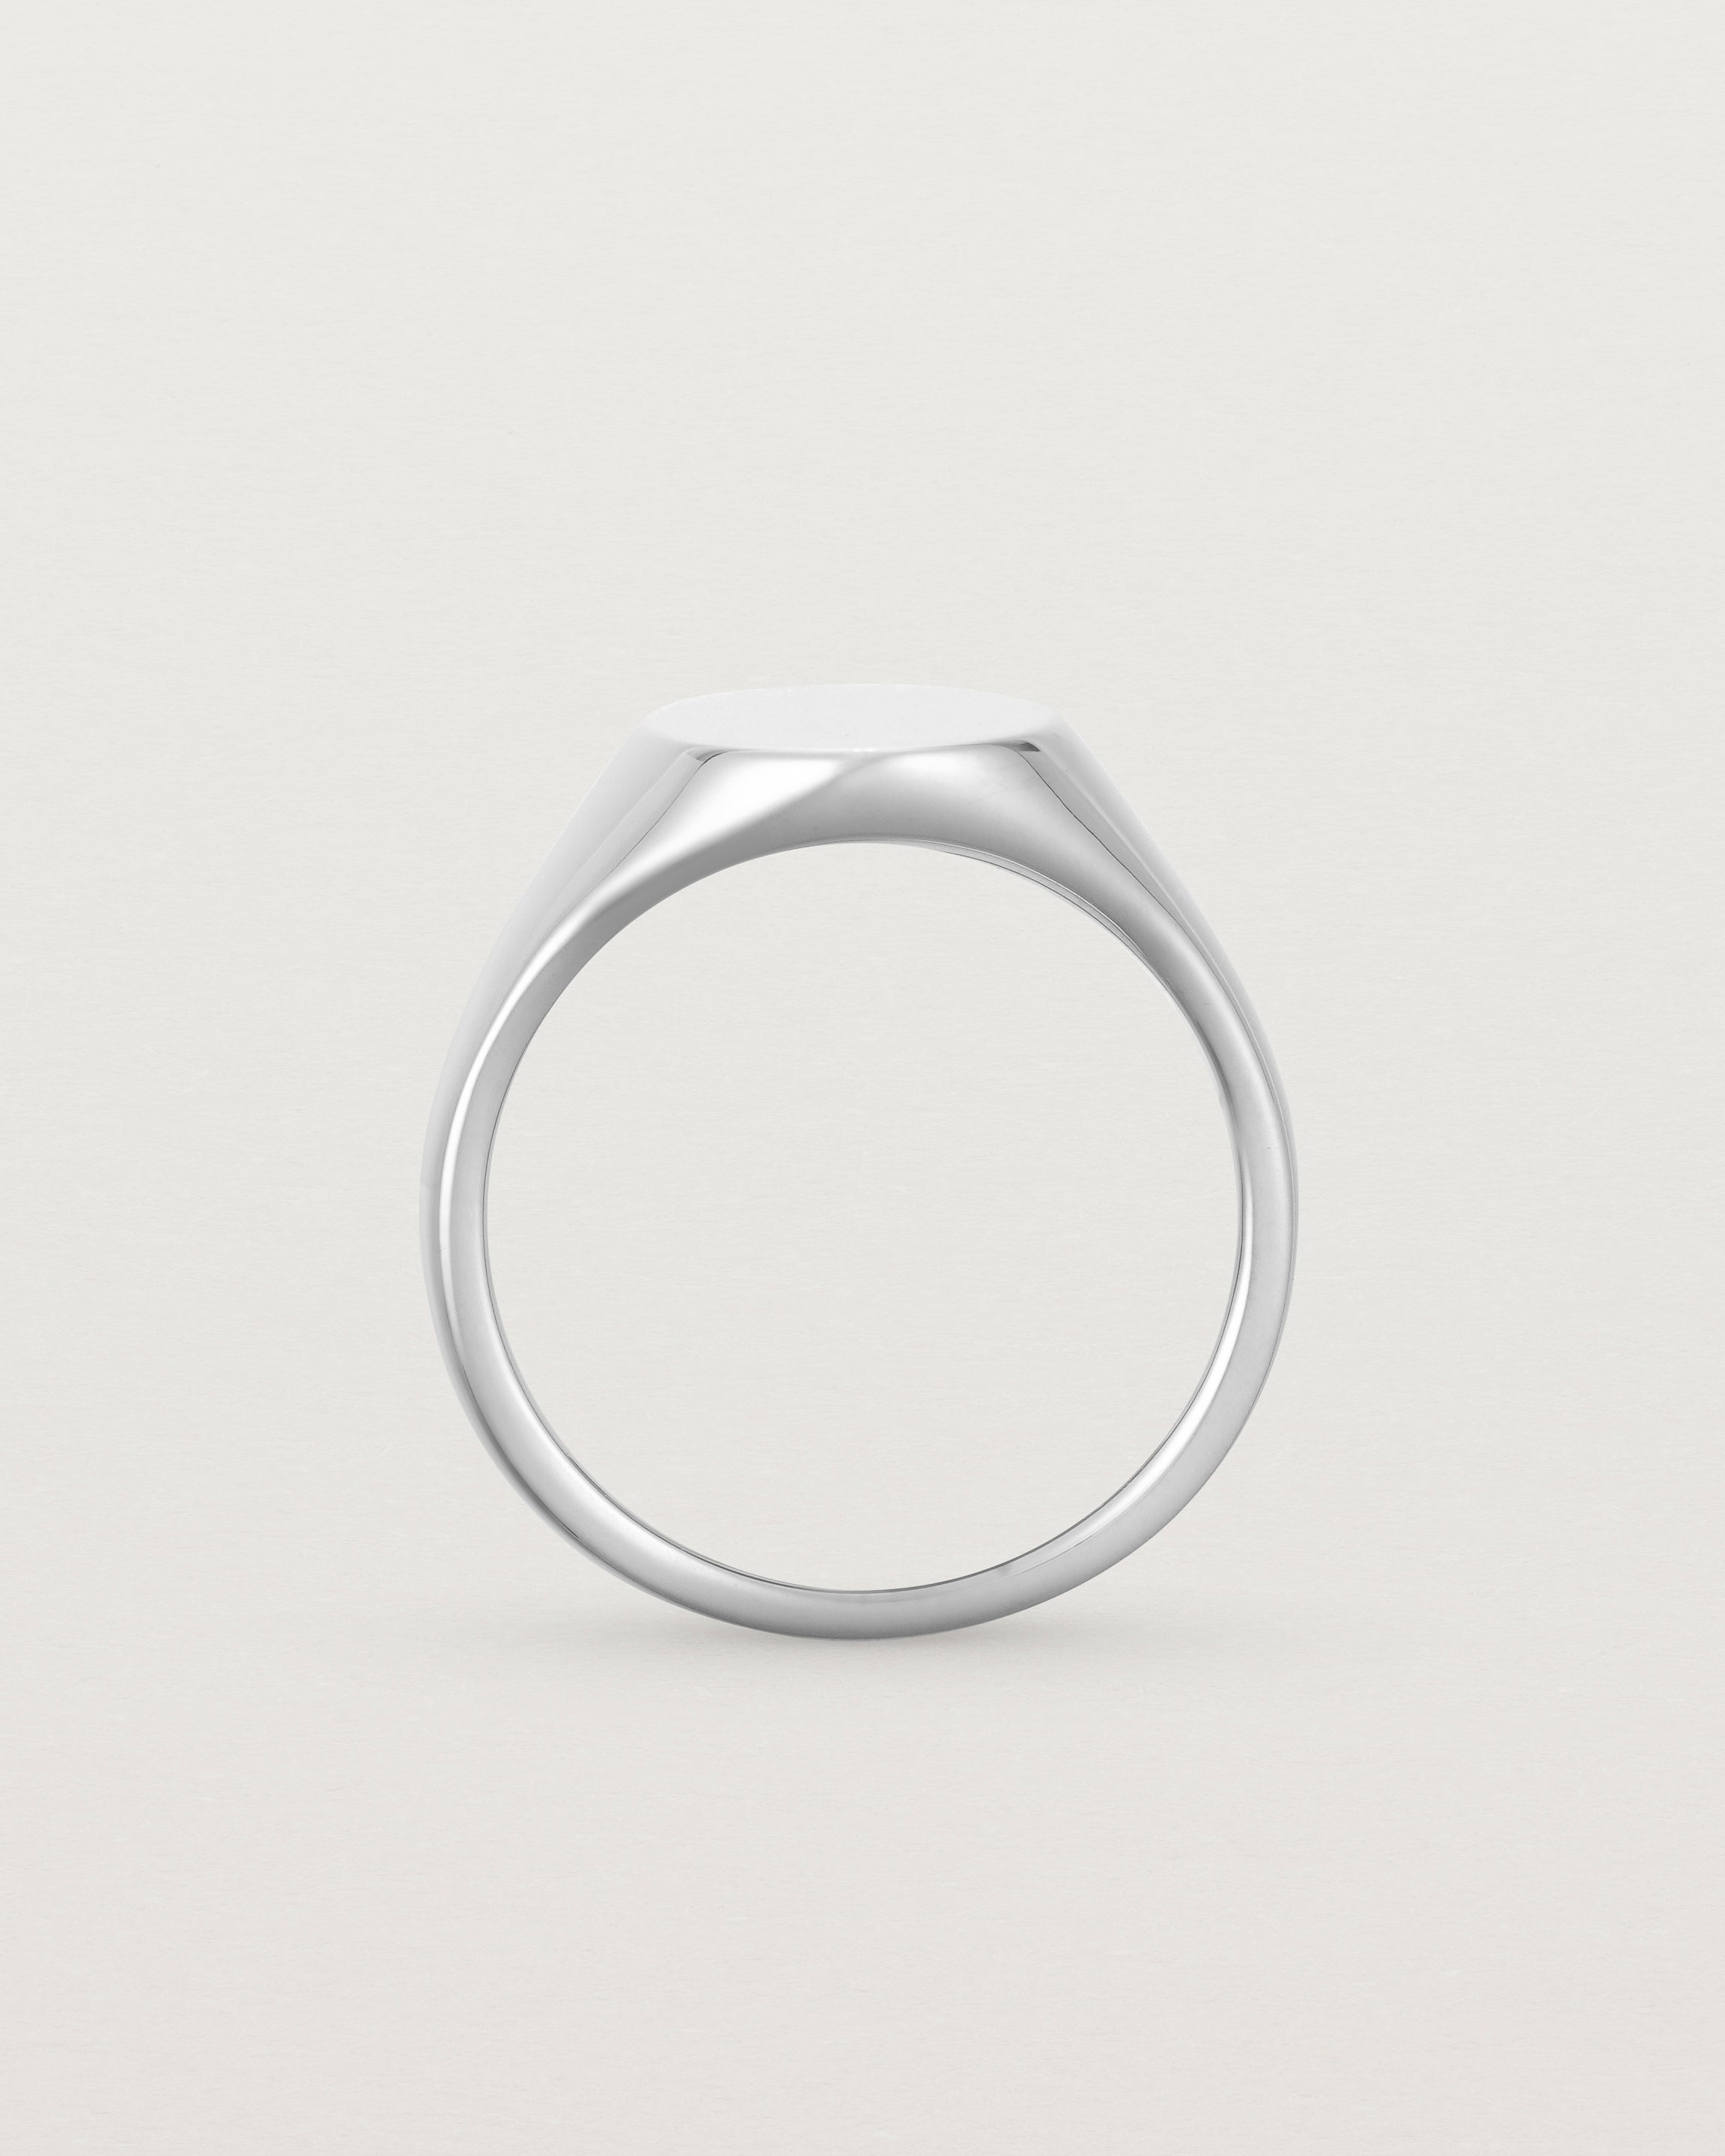 Standing view of the Arden Signet Ring in White Gold.